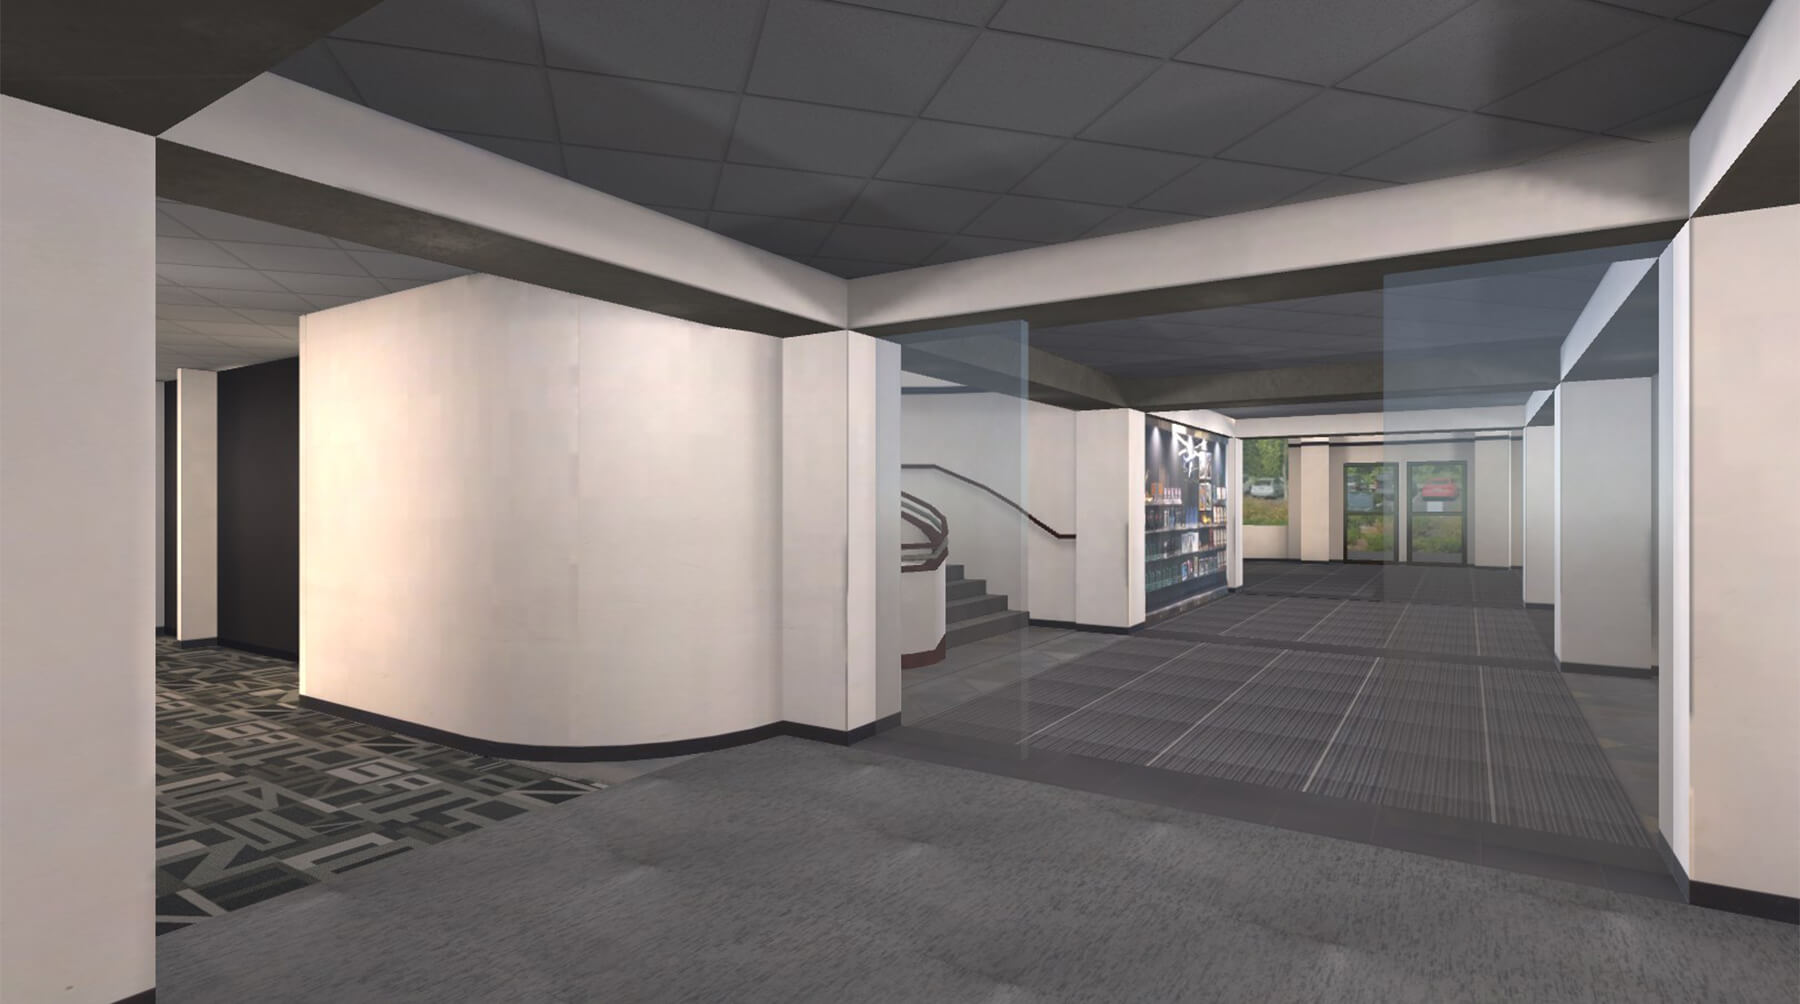 A 3D model of DigiPen's lobby, where AVAR attendees will be able to chat and network.